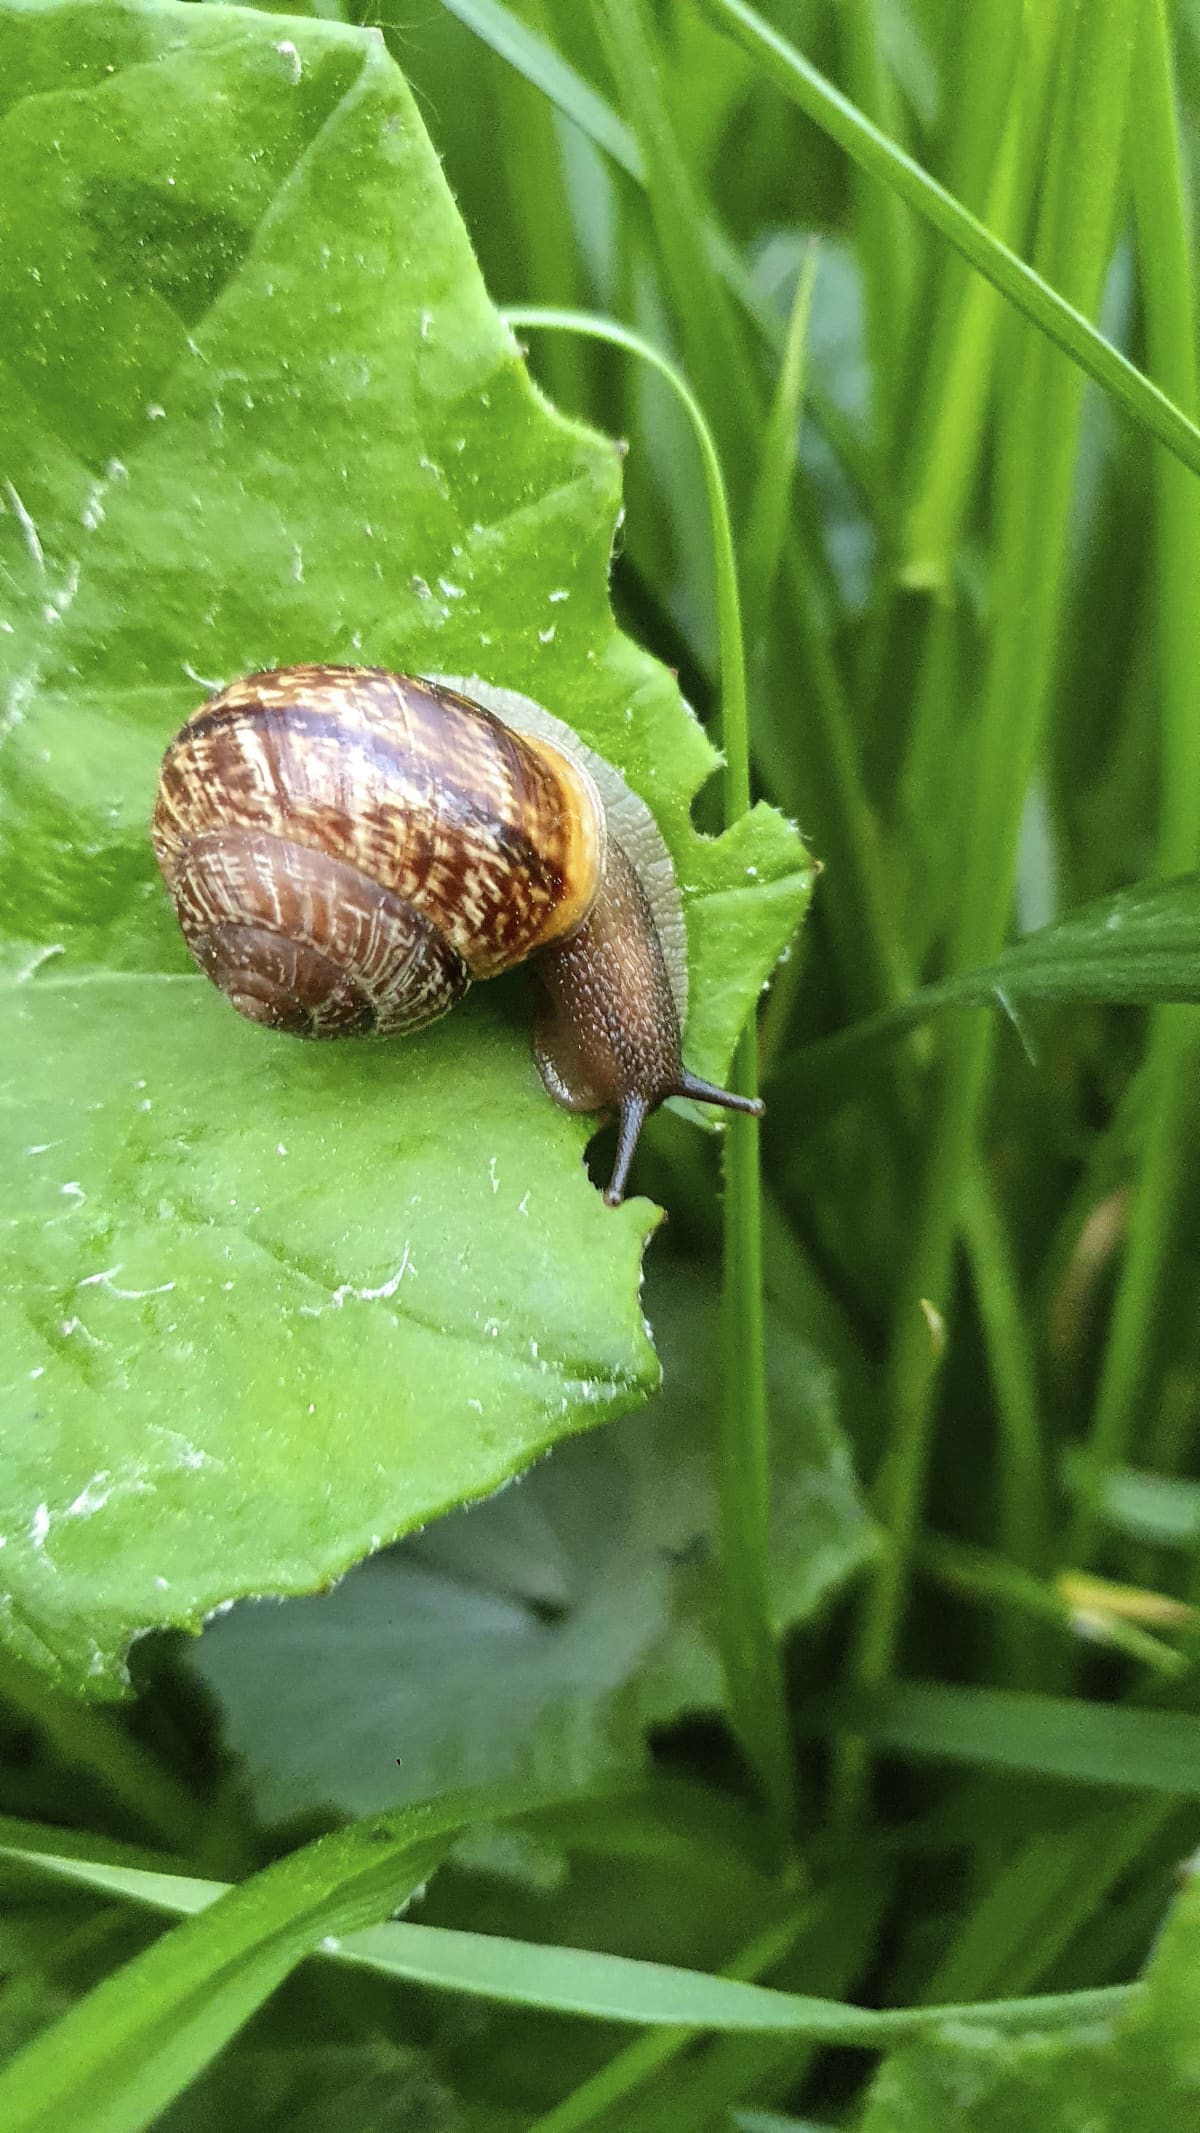 A snail on hosta leaves which have been previously damaged by snail / slug attack.See also: